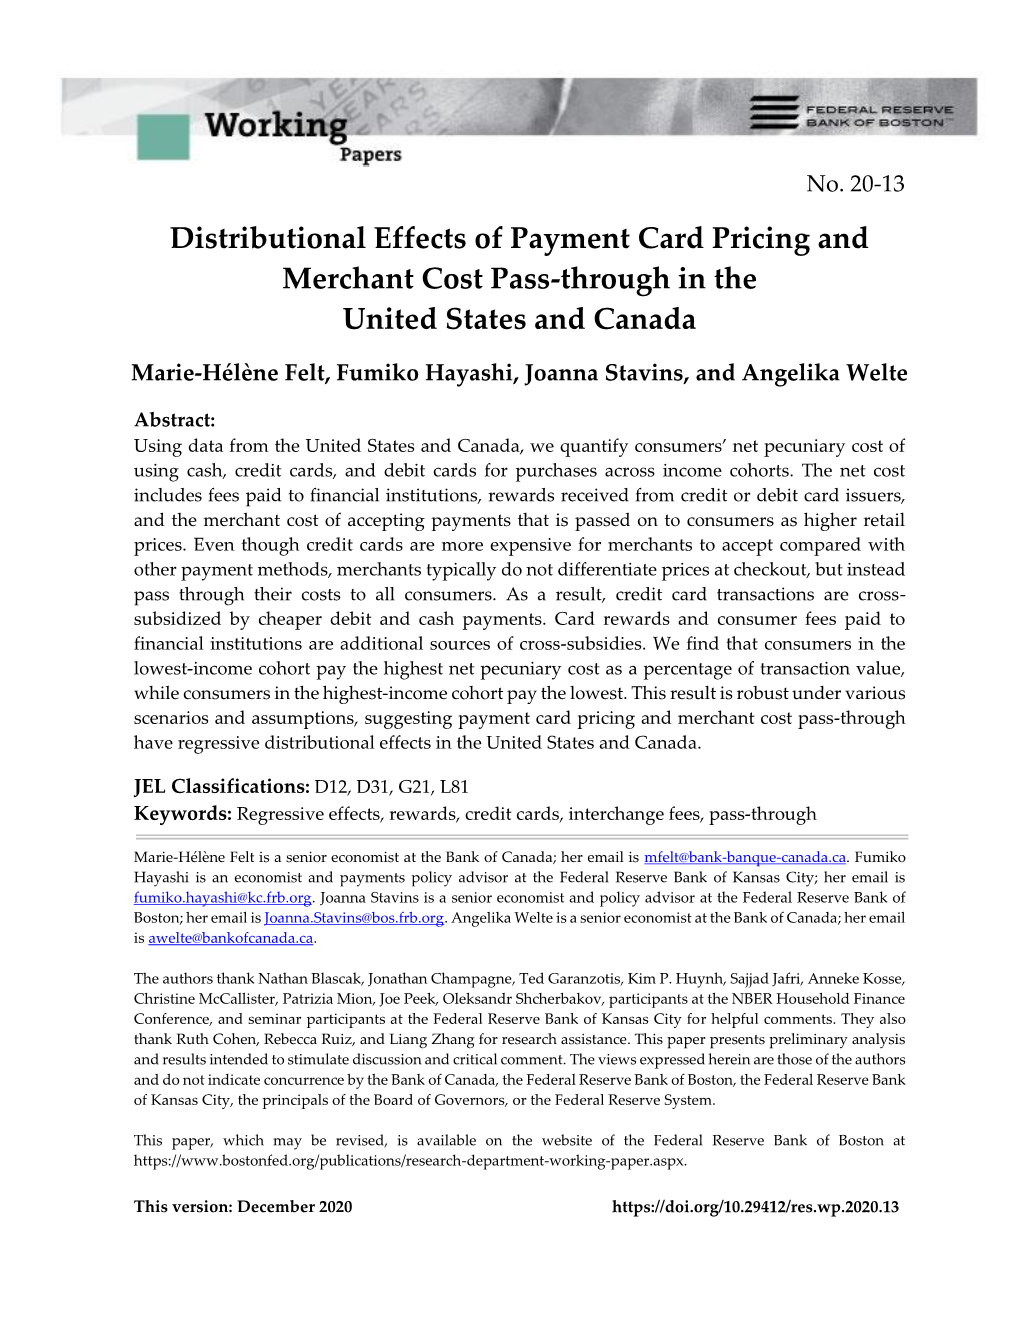 Distributional Effects of Payment Card Pricing and Merchant Cost Pass-Through in the United States and Canada